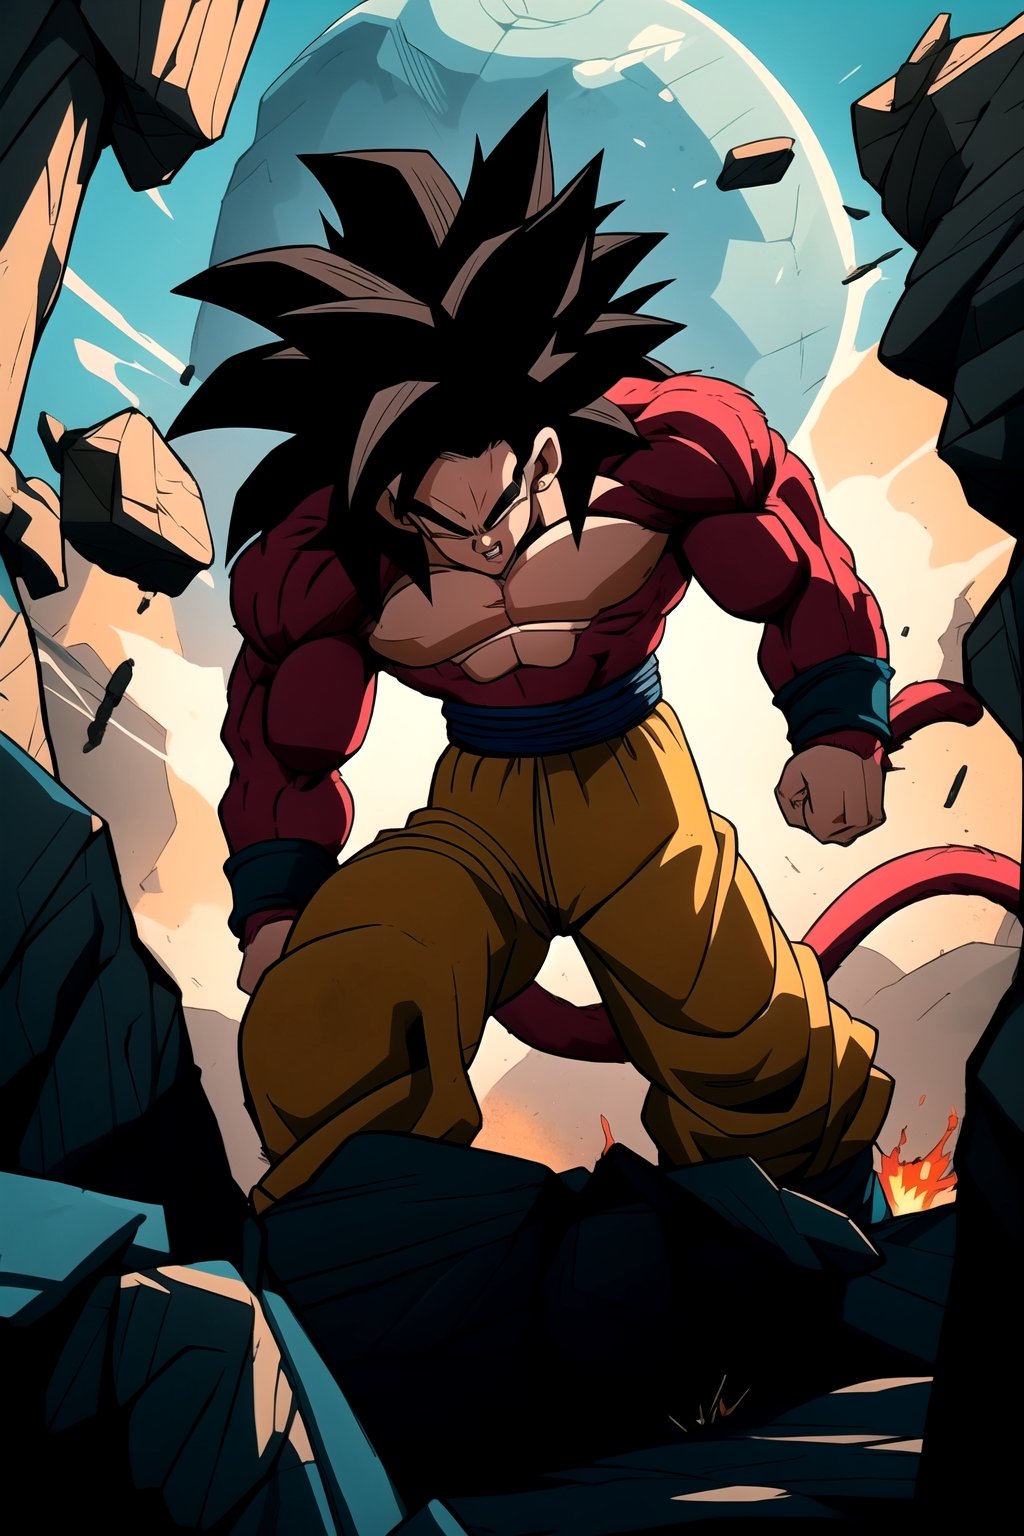 In the world of "DRAGON BALL", a dynamic and action-packed scene unfolds. The focus is on powerful and energetic characters engaged in intense battles. The main characters, Goku and Vegeta, stand at the forefront, showcasing their incredible strength and determined expressions. Their muscular and well-defined bodies are highlighted, with attention to every rippling muscle. Their spiky hair, iconic to the Dragon Ball series, is meticulously detailed.

The scene is set in a vast and vibrant landscape, with colorful exotic plants and towering cliffs. The sky above is adorned with multiple shades of blue, portraying a sense of endless adventure. Bright sunlight shines down, casting dynamic shadows on the characters and the environment. The scene is further enhanced with immersive studio lighting, emphasizing the epic nature of the battle.

One side of the battlefield features Goku, radiating an aura of fiery energy with his glowing Super Saiyan transformation. The other side showcases Vegeta, emanating a brilliant blue aura, representing his intense determination. The clash between their powers creates a dazzling display of energy beams and shockwaves. The environment shakes under the force of their attacks, with rocks and debris flying in all directions.

The overall image quality is of the highest standard, ensuring every detail is richly rendered. The image resolution is set at (best quality, 4k, 8k, highres, masterpiece:1.2) to capture the full glory of the scene. The artwork is portrayed in a realistic and photorealistic style, leading to an immersive experience.

To add a touch of drama and excitement, the color palette leans towards vibrant and vivid tones. Rich blues, fiery reds, and intense yellows dominate the image, creating a visually stunning composition. The lighting effects play a crucial role in this scene, with strategically placed highlights and shadows enhancing the depth and three-dimensionality of the characters and environment.

In summary, the prompt for this Dragon Ball-inspired artwork is:
Goku and Vegeta engage in an intense and dynamic battle scene, showcasing their incredible strength and determination. The landscape is vibrant and diverse, with exotic plants and towering cliffs. The sky above is decorated with multiple shades of blue, depicting an endless adventure. The characters' muscular and well-defined bodies are meticulously detailed, and their spiky hair is iconic. Powerful energy beams and shockwaves emanate from the clash, shaking the environment. The image quality is set at (best quality, 4k, 8k, highres, masterpiece:1.2) with a photorealistic style. The color palette is vibrant, and the lighting effects add depth and drama to the scene.